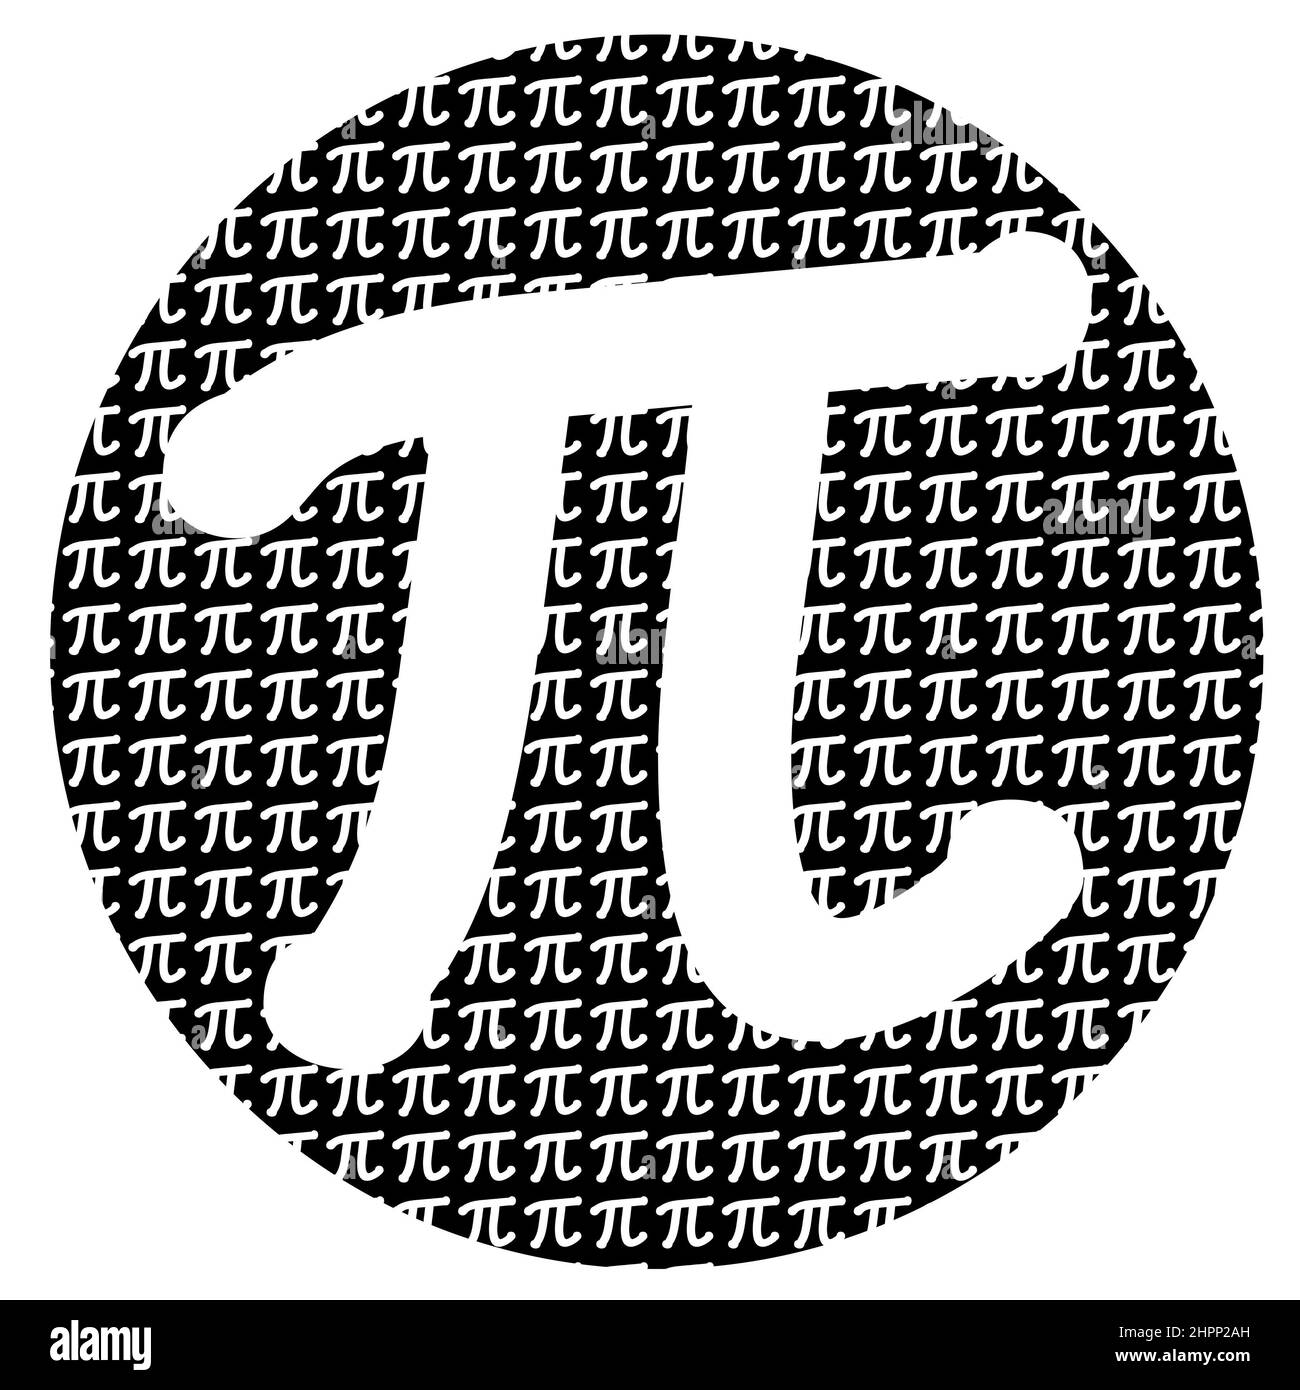 Happy pi day holiday pi sign typography in aqua, black and white. STEM education concept to encourage learning science tech engineering maths Stock Photo